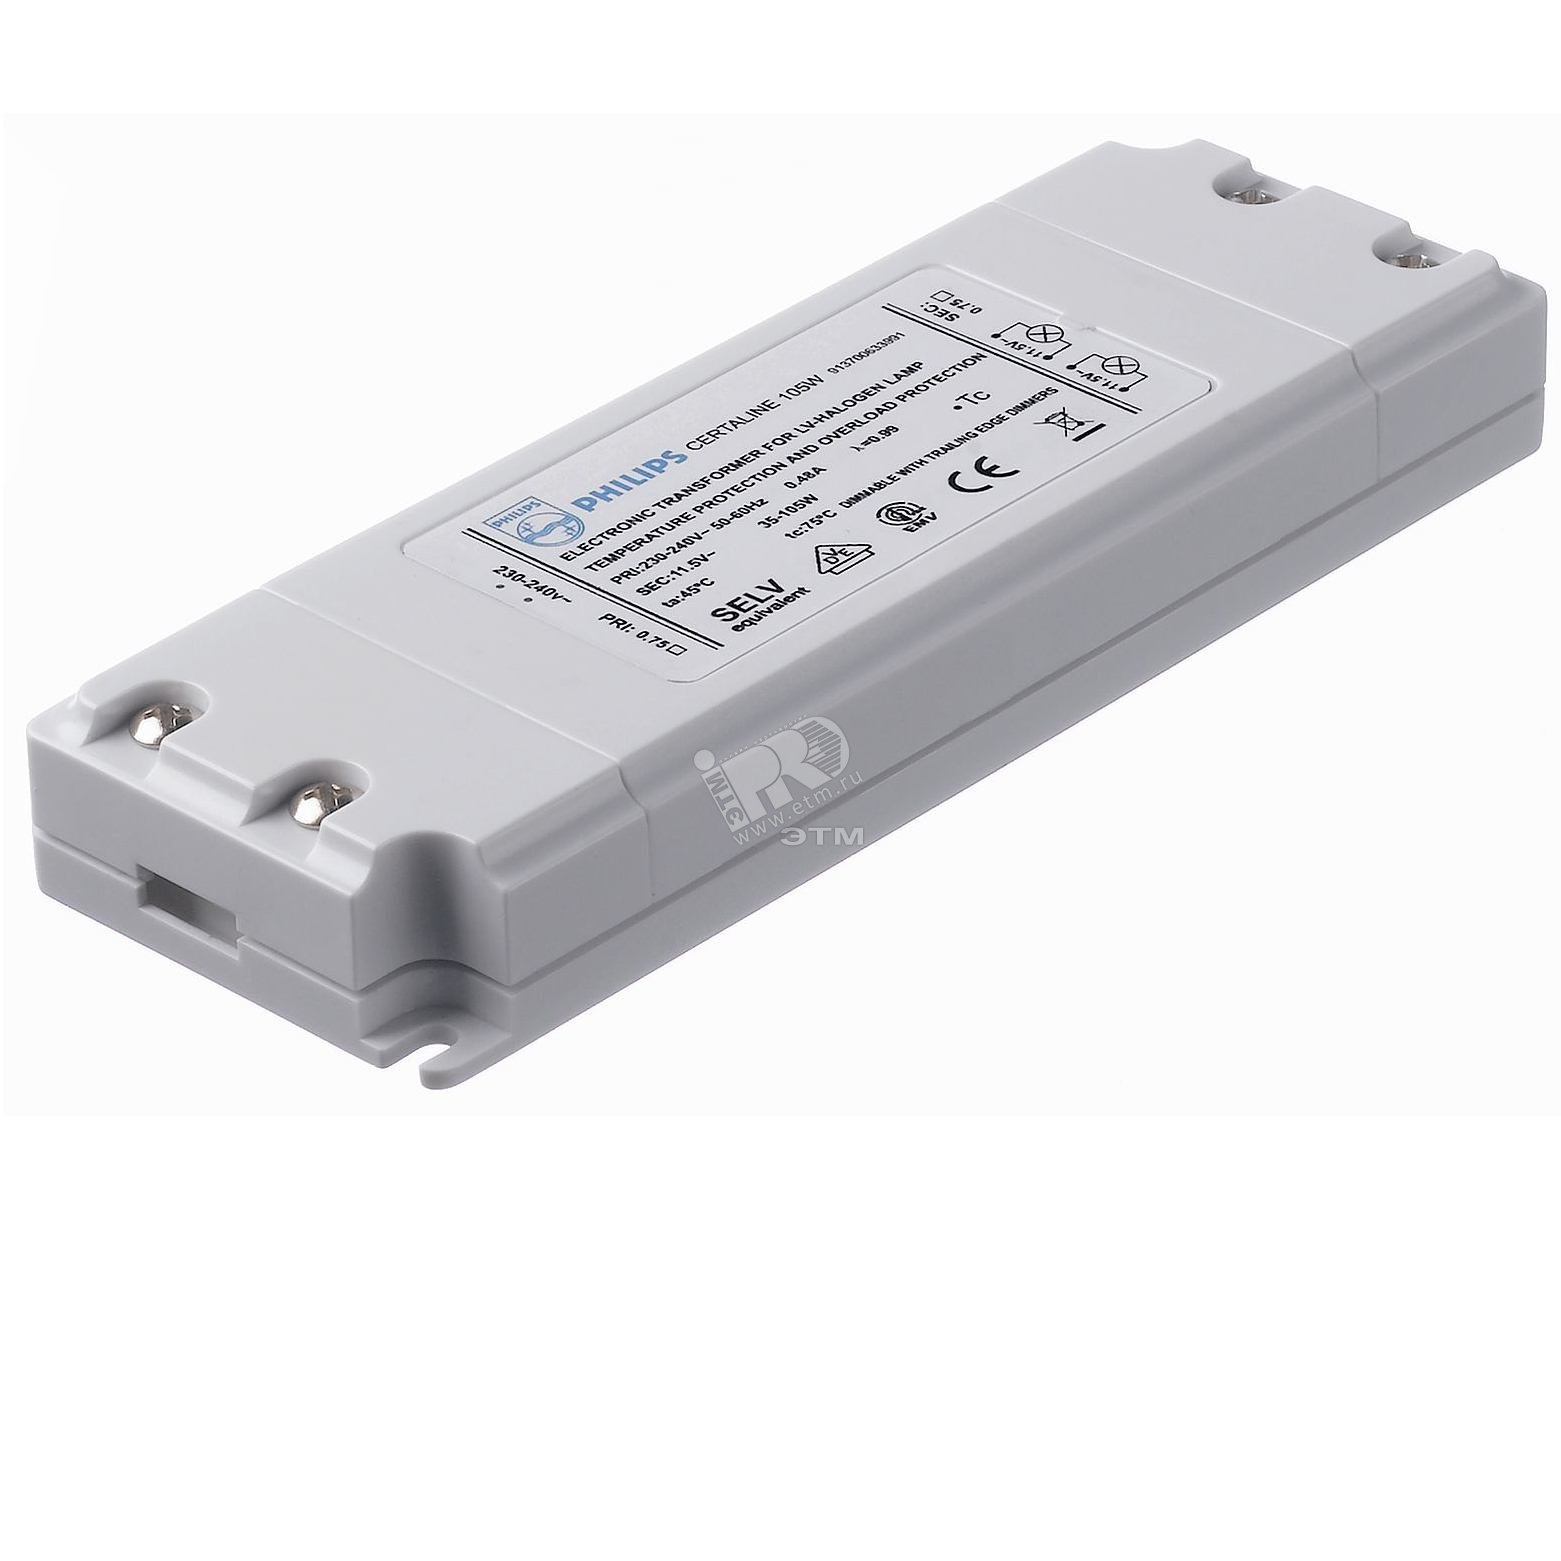 12v 240v 50 60hz. Electronic Transformer 105w. Electronic Transformer for Low-Voltage Halogen Lamps the 105 ватт. Electronic Transformer for Low-Voltage Halogen Lamps the 150 ватт. Трансформатор Philips et-s 105 230-240.